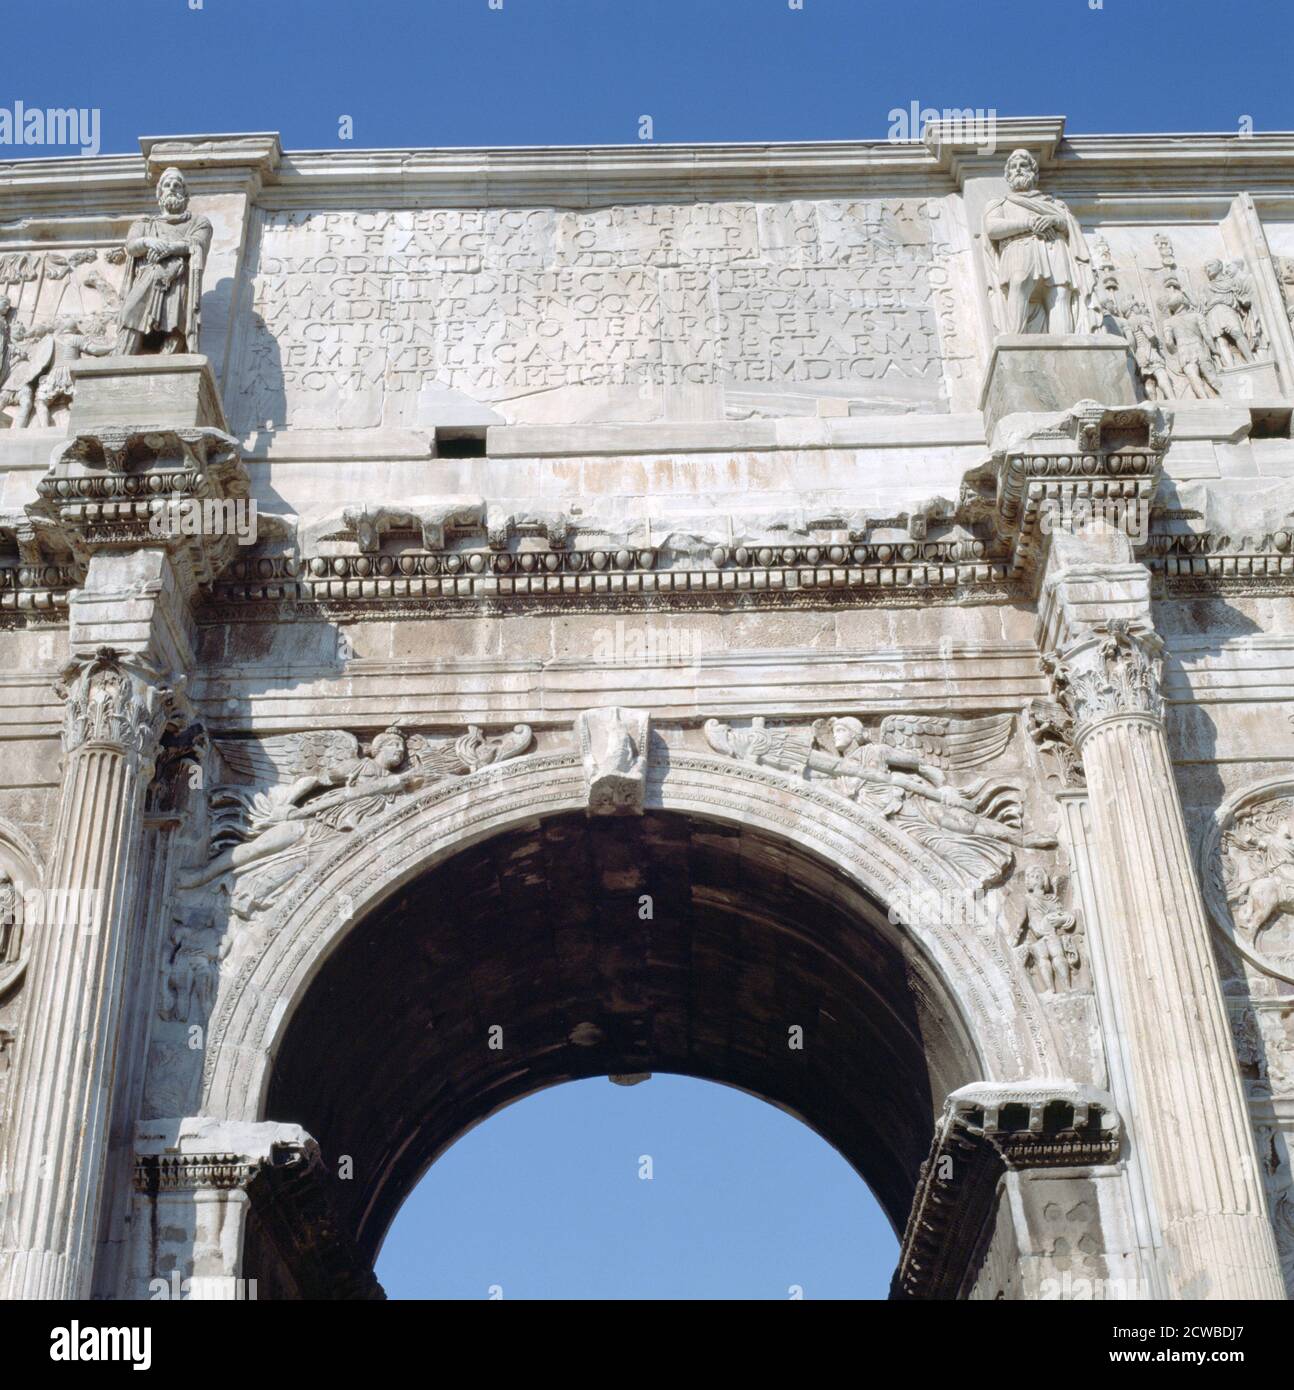 Arch of Constantine, Rome, 4th century. The Arch of Constantine is a triumphal arch in Rome, situated between the Colosseum and the Palatine Hill. It was erected to commemorate Constantine I's victory over Maxentius at the Battle of Milvian Bridge on October 28, 312. The artist is unknown. Stock Photo